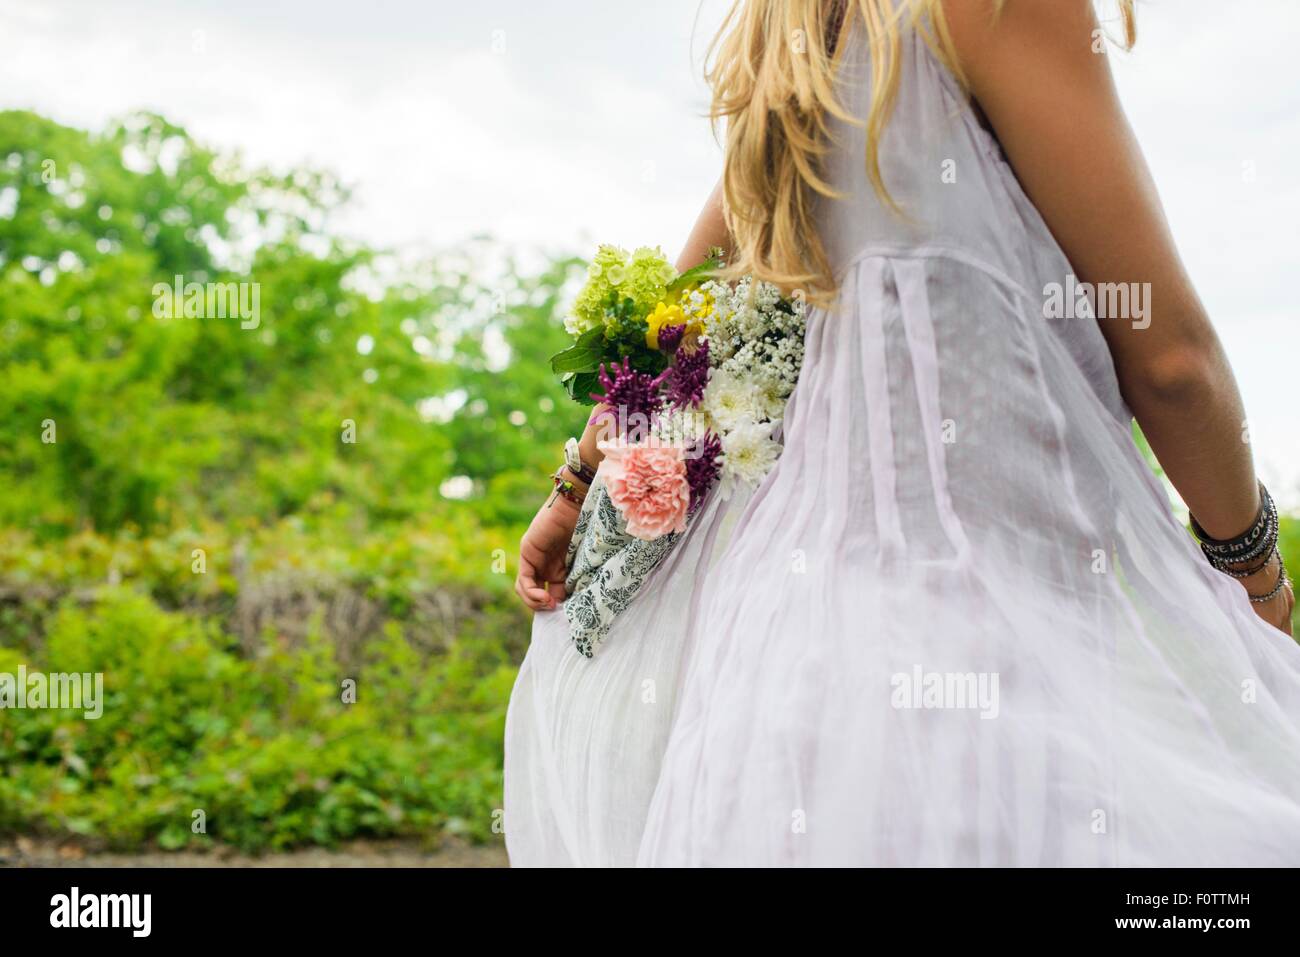 Cropped shot of young woman wearing white dress carrying bunch of flowers behind her back Stock Photo